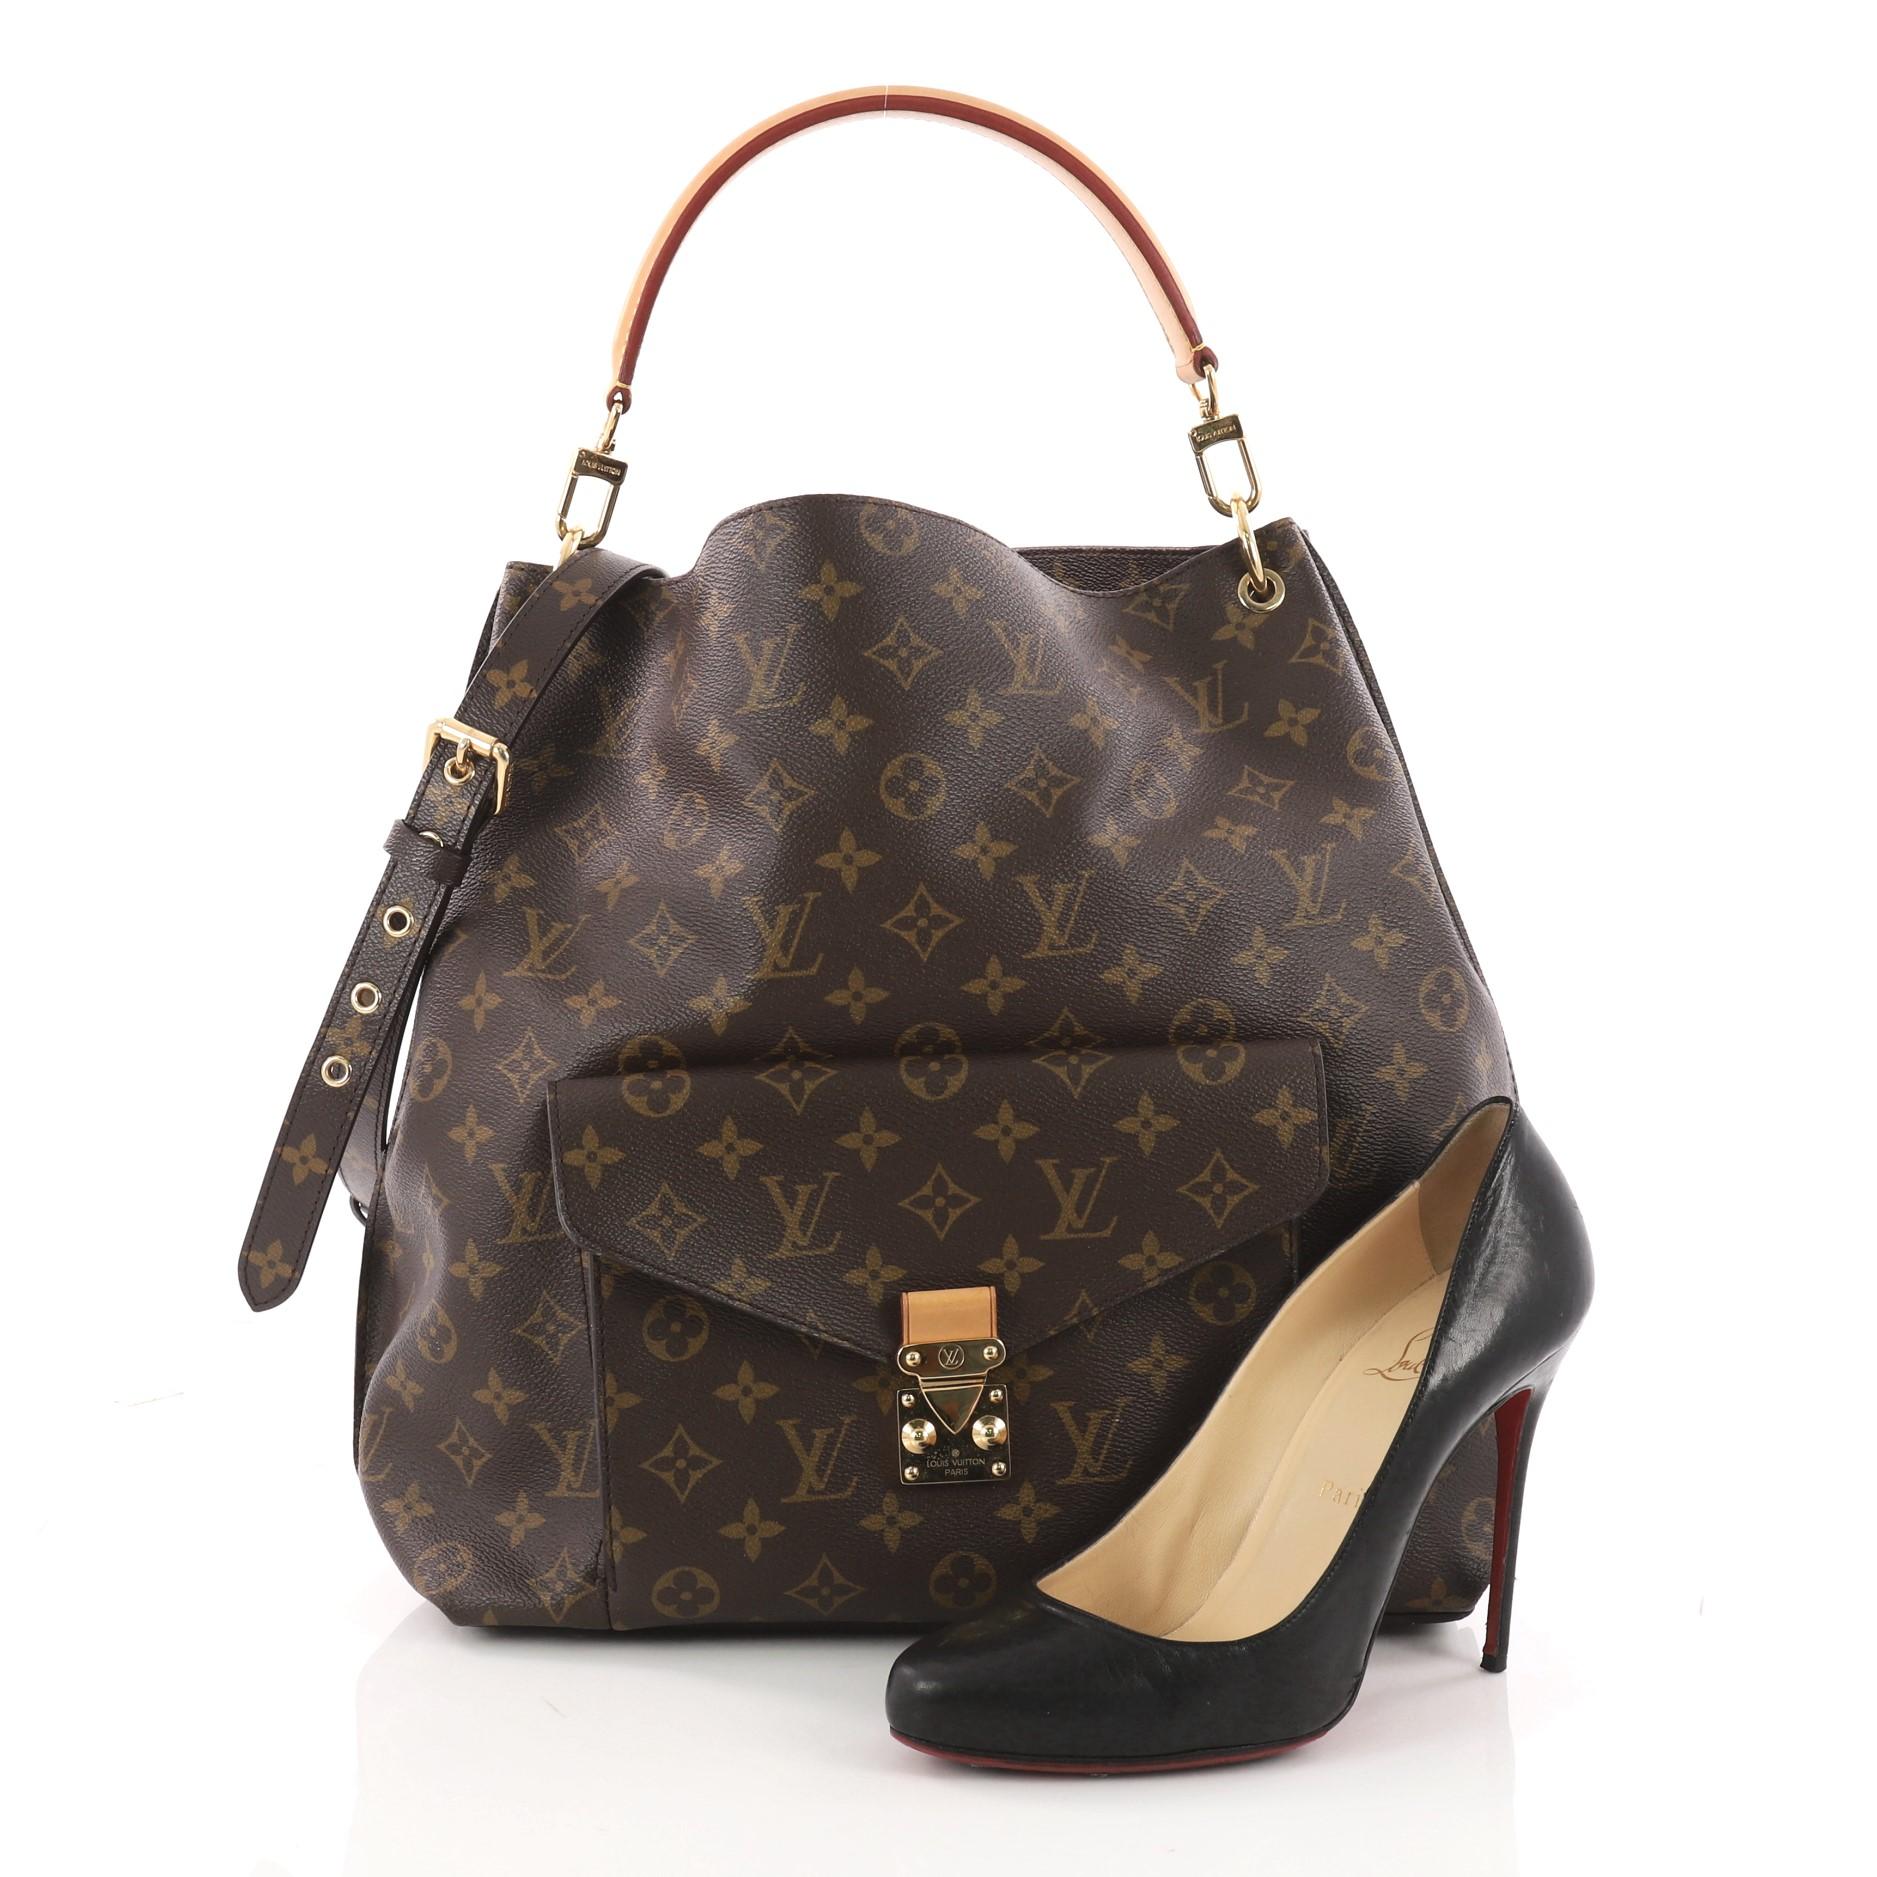 This authentic Louis Vuitton Metis Hobo Monogram Canvas epitomizes luxurious design and the brand's commitment to timeless sophistication with a modern twist. Crafted in iconic brown monogram coated canvas, this hobo features a front flap pocket